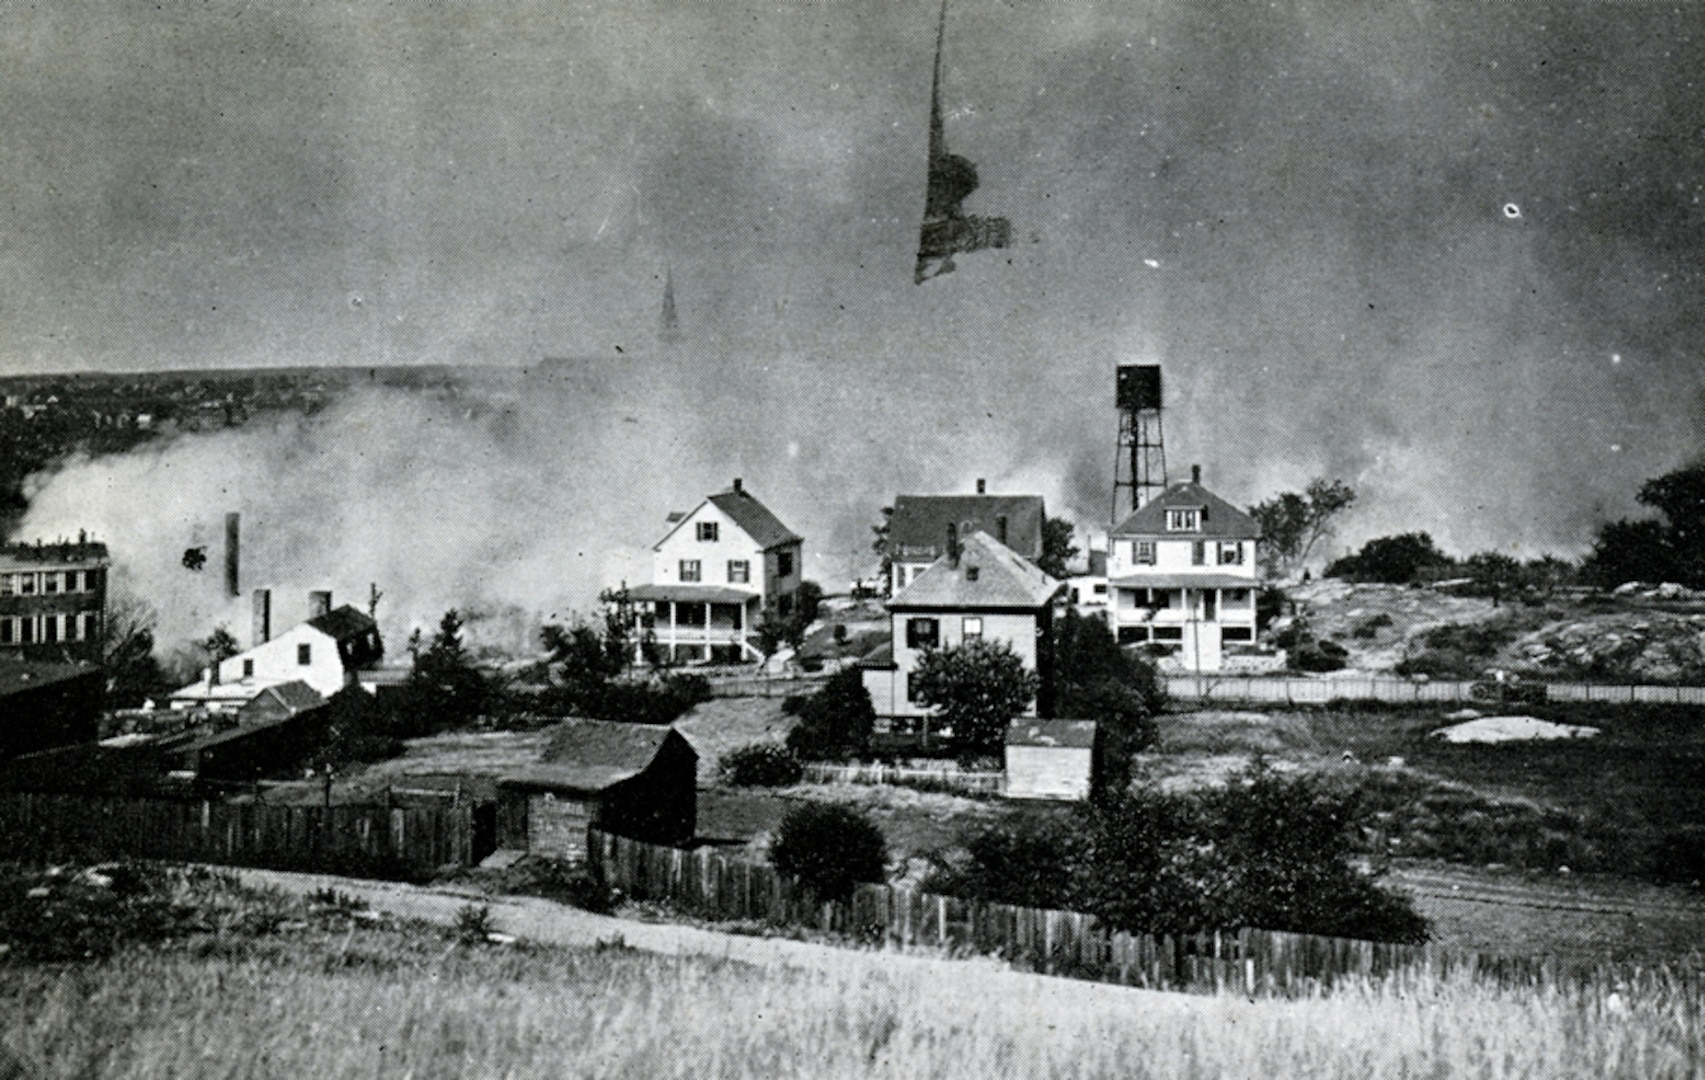 A view of the great fire in Salem, Massachusetts, on June 25, 1914, as seen from Gallows Hill. National Guard units responded in force to assist civilian authorities with managing the disaster.